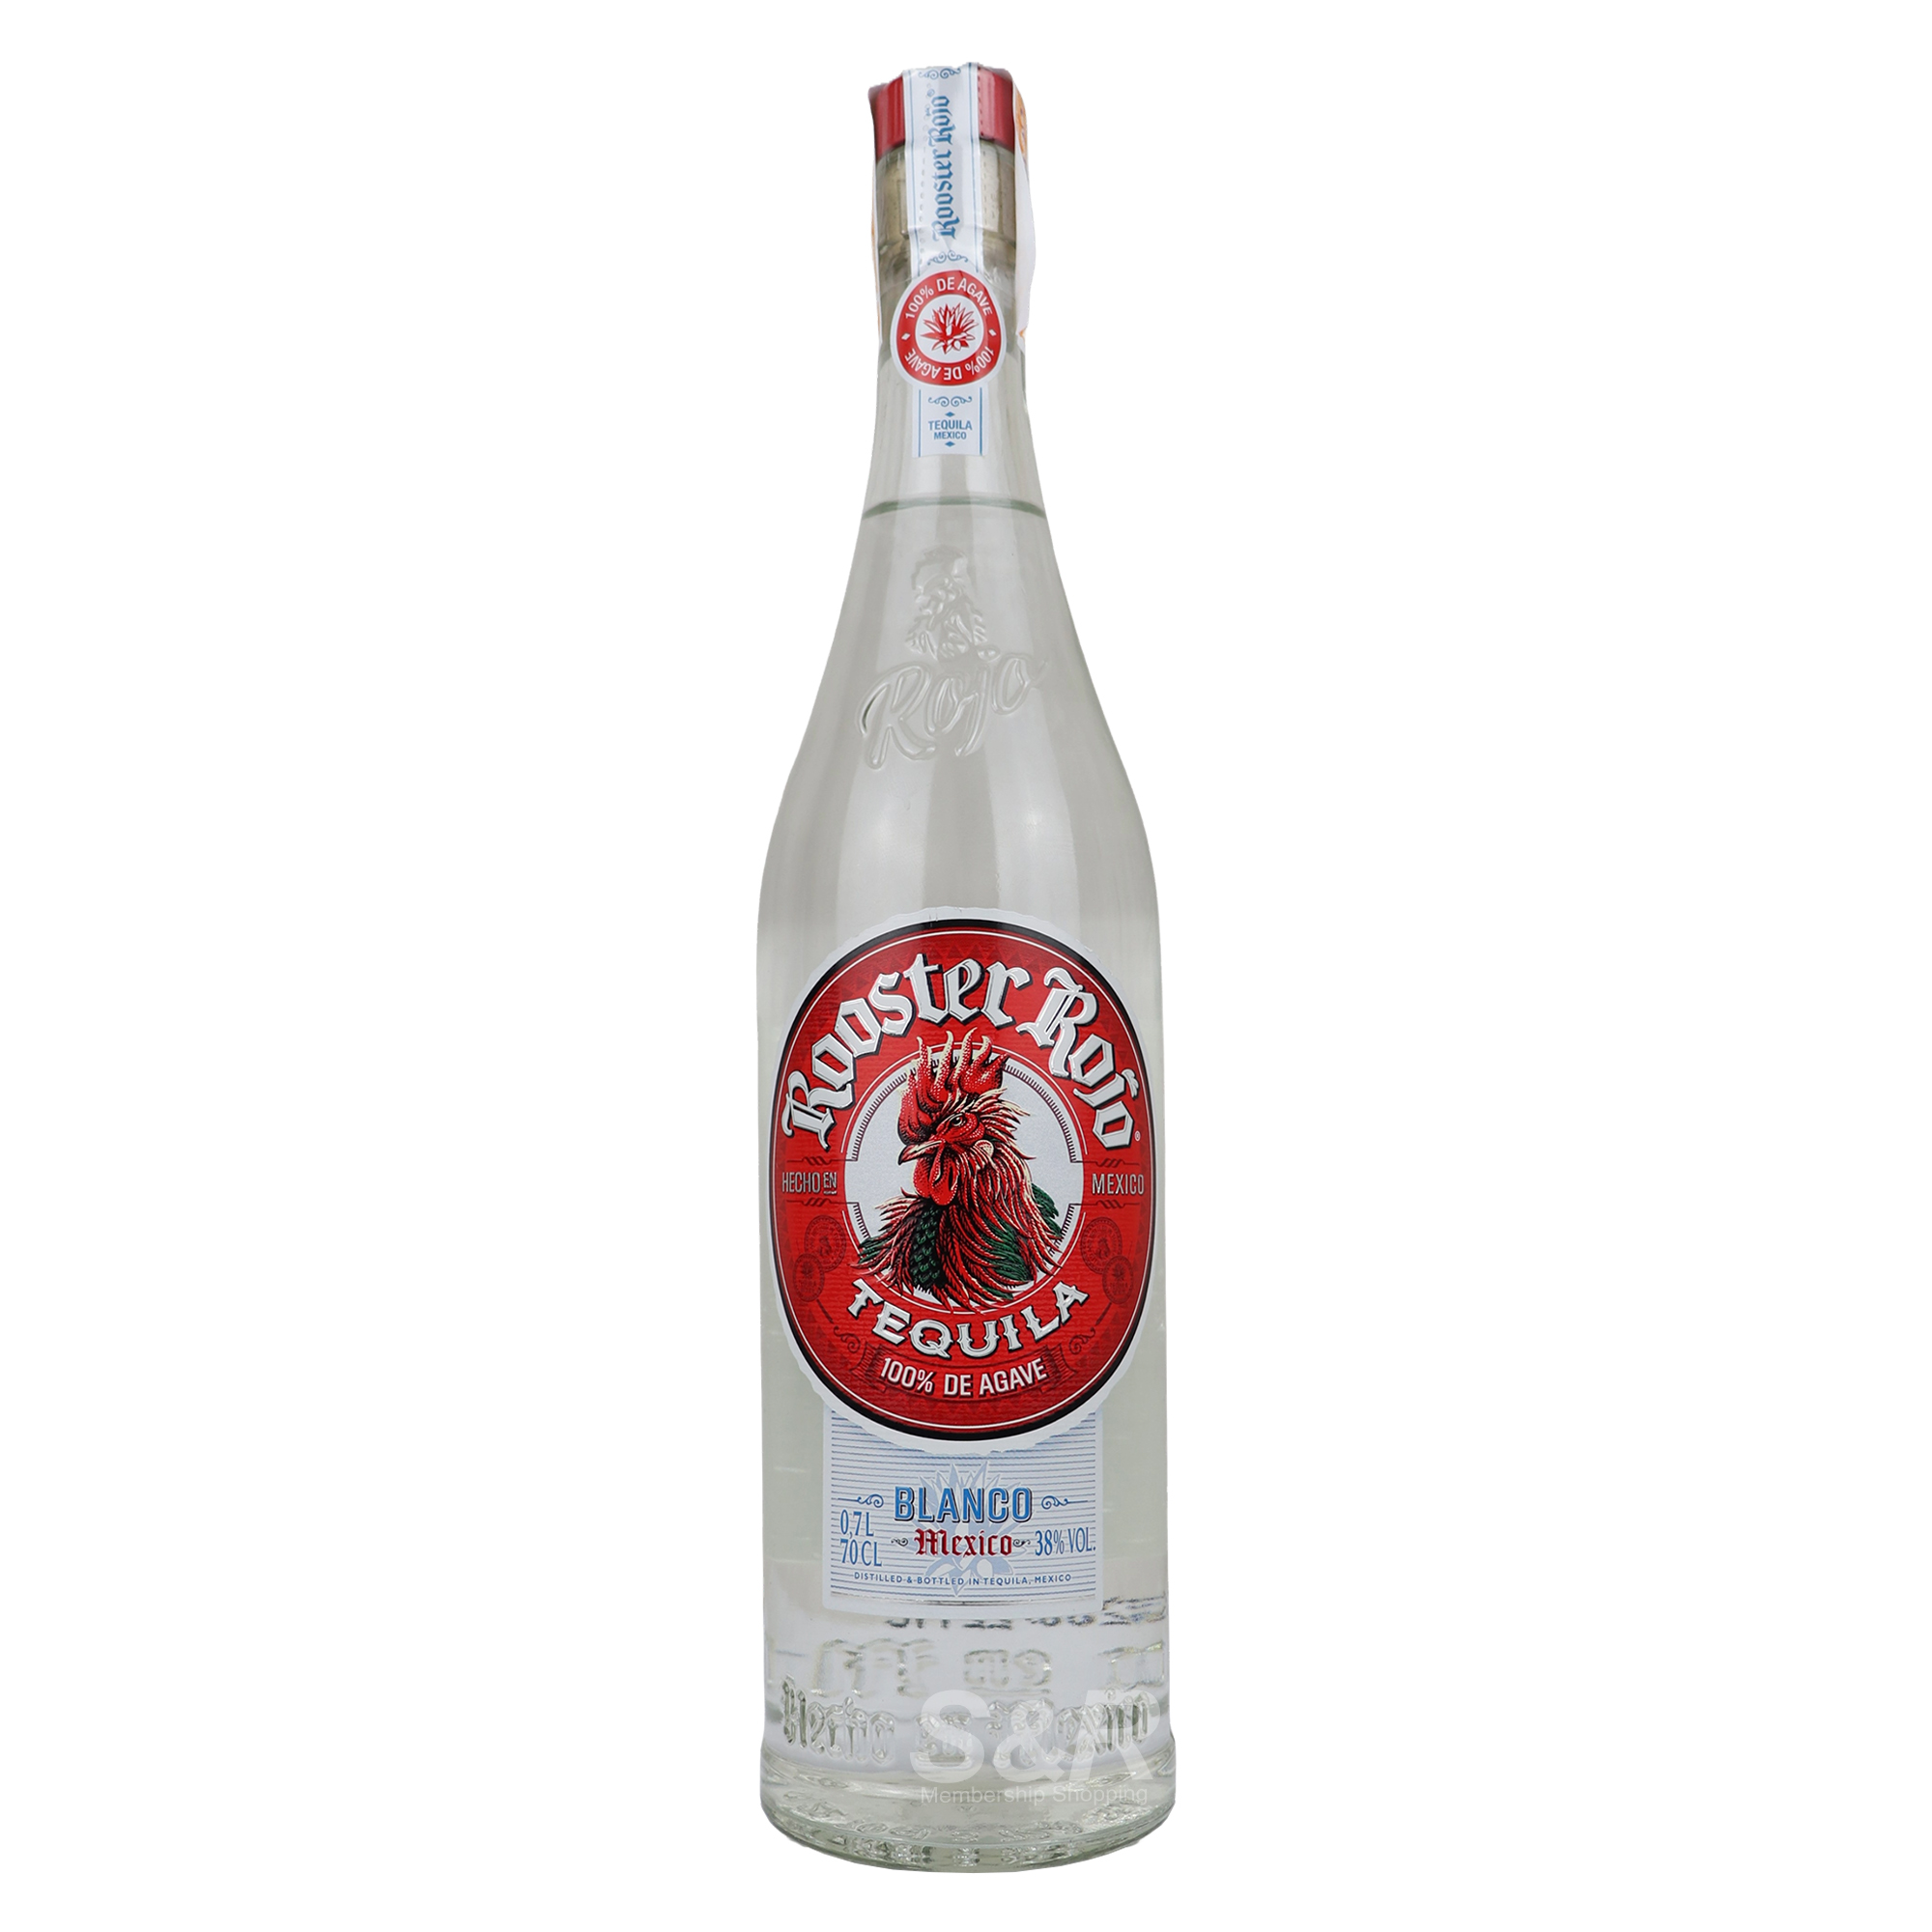 Rooster Roho Blanco Tequila 700mL